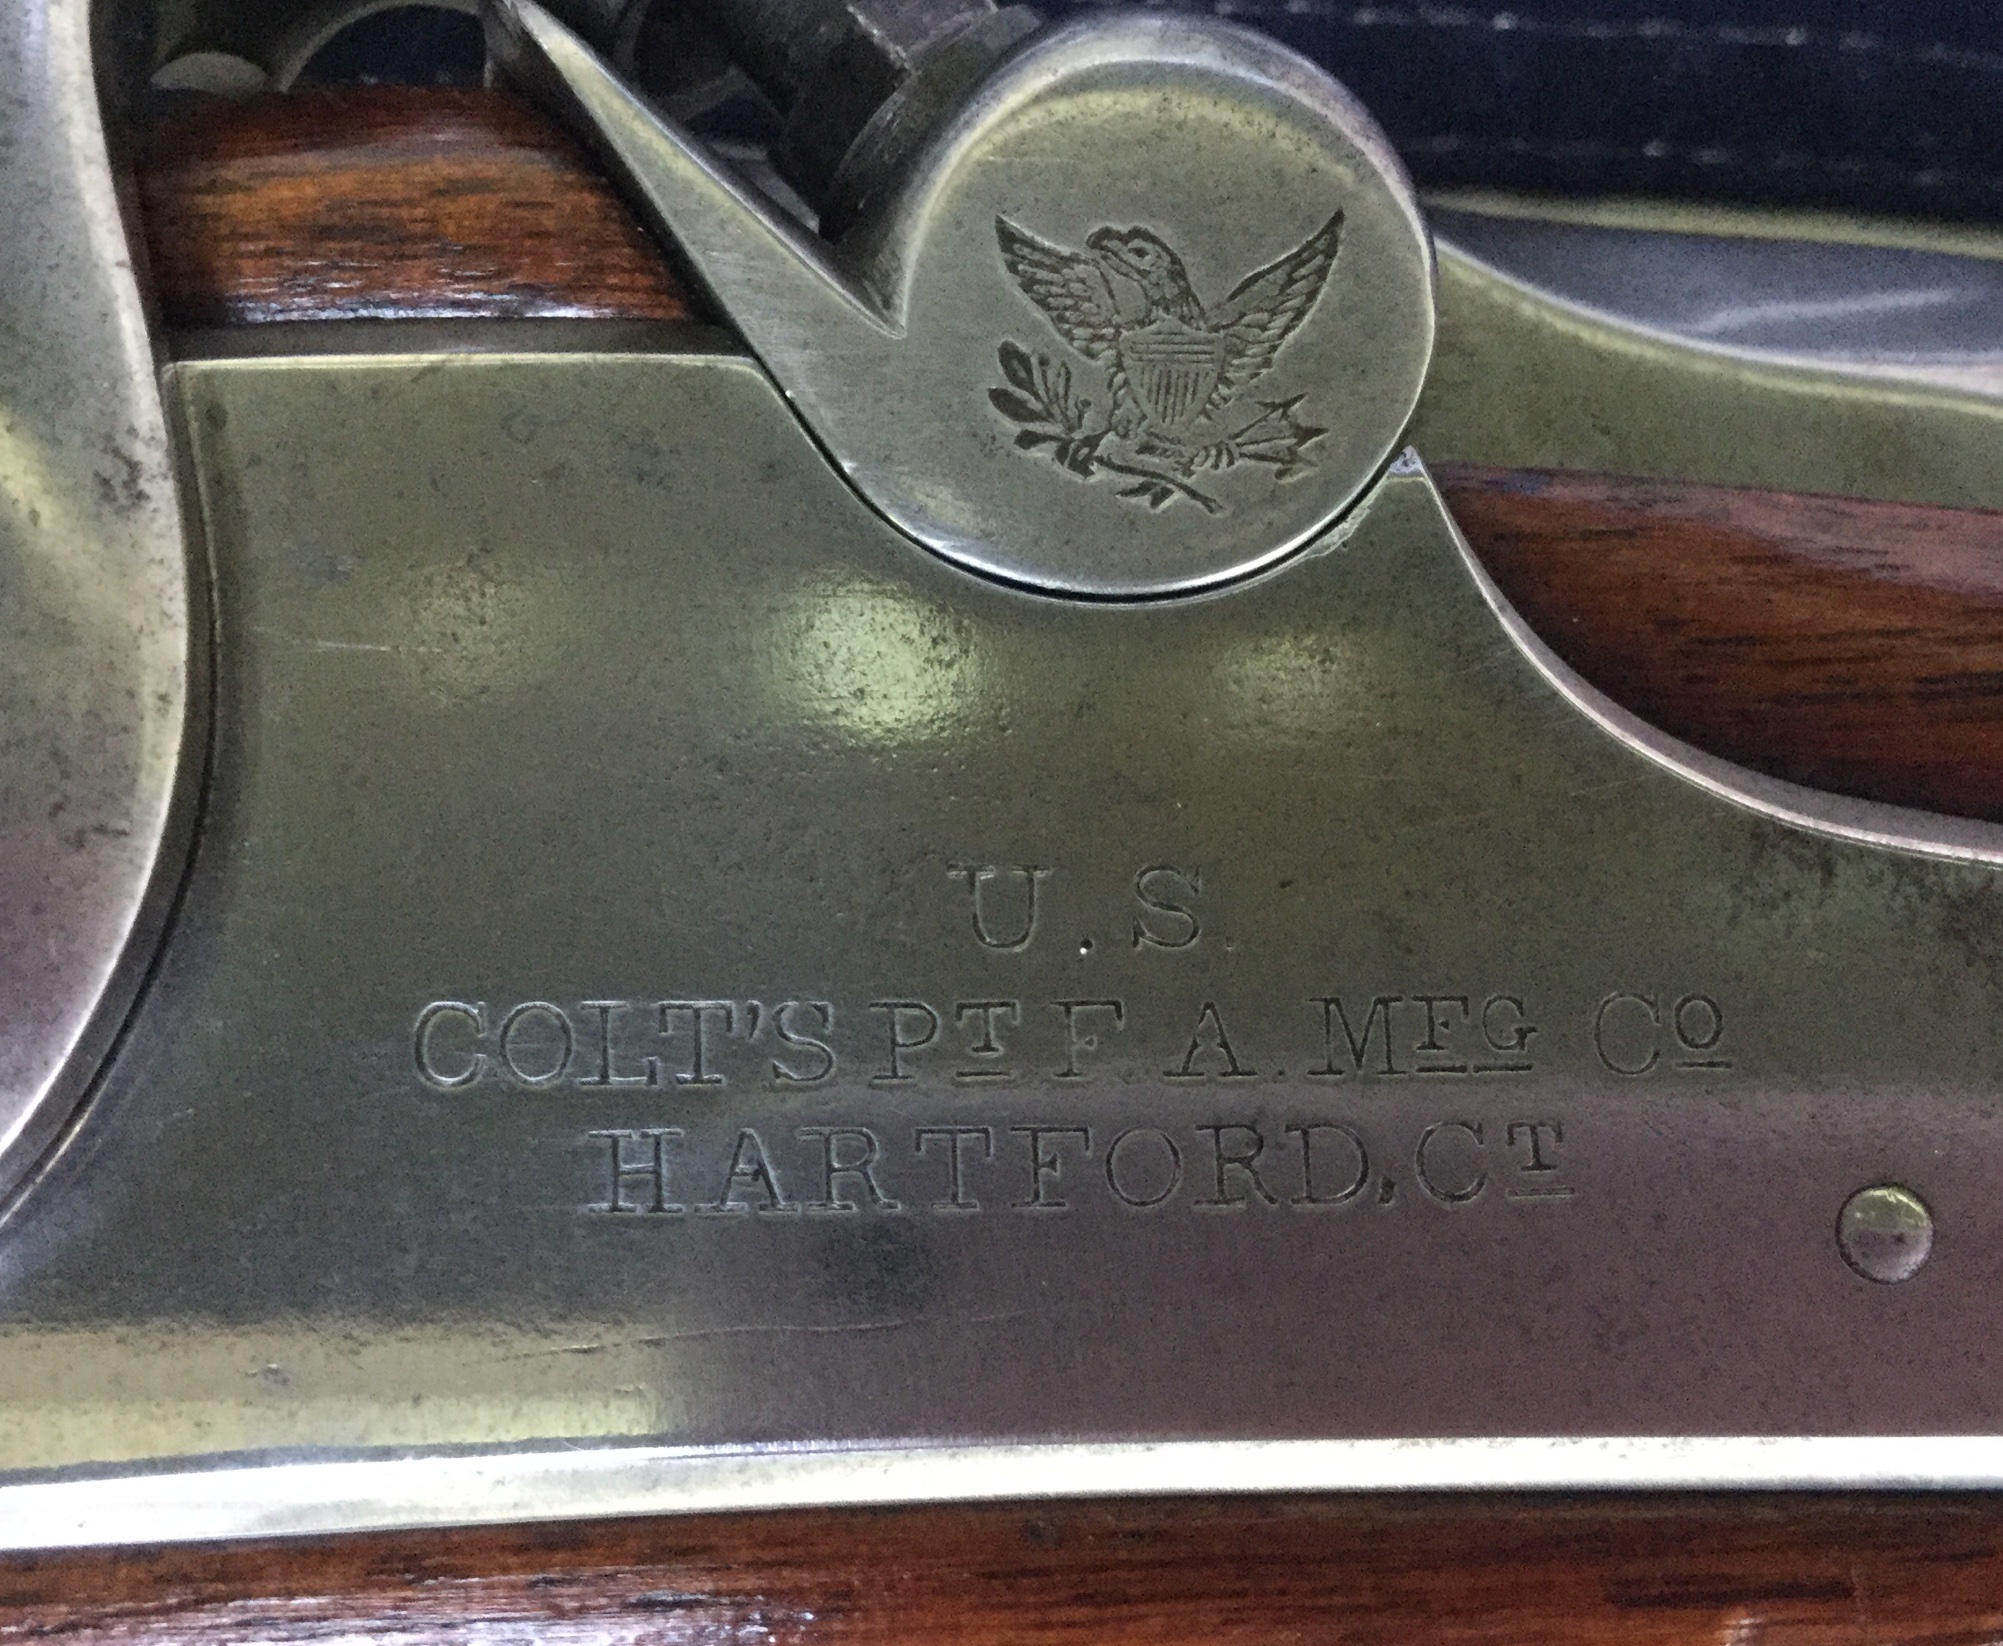 Colt’s Patent FireArms Manufacturing’s Company, Hartford Connecticut